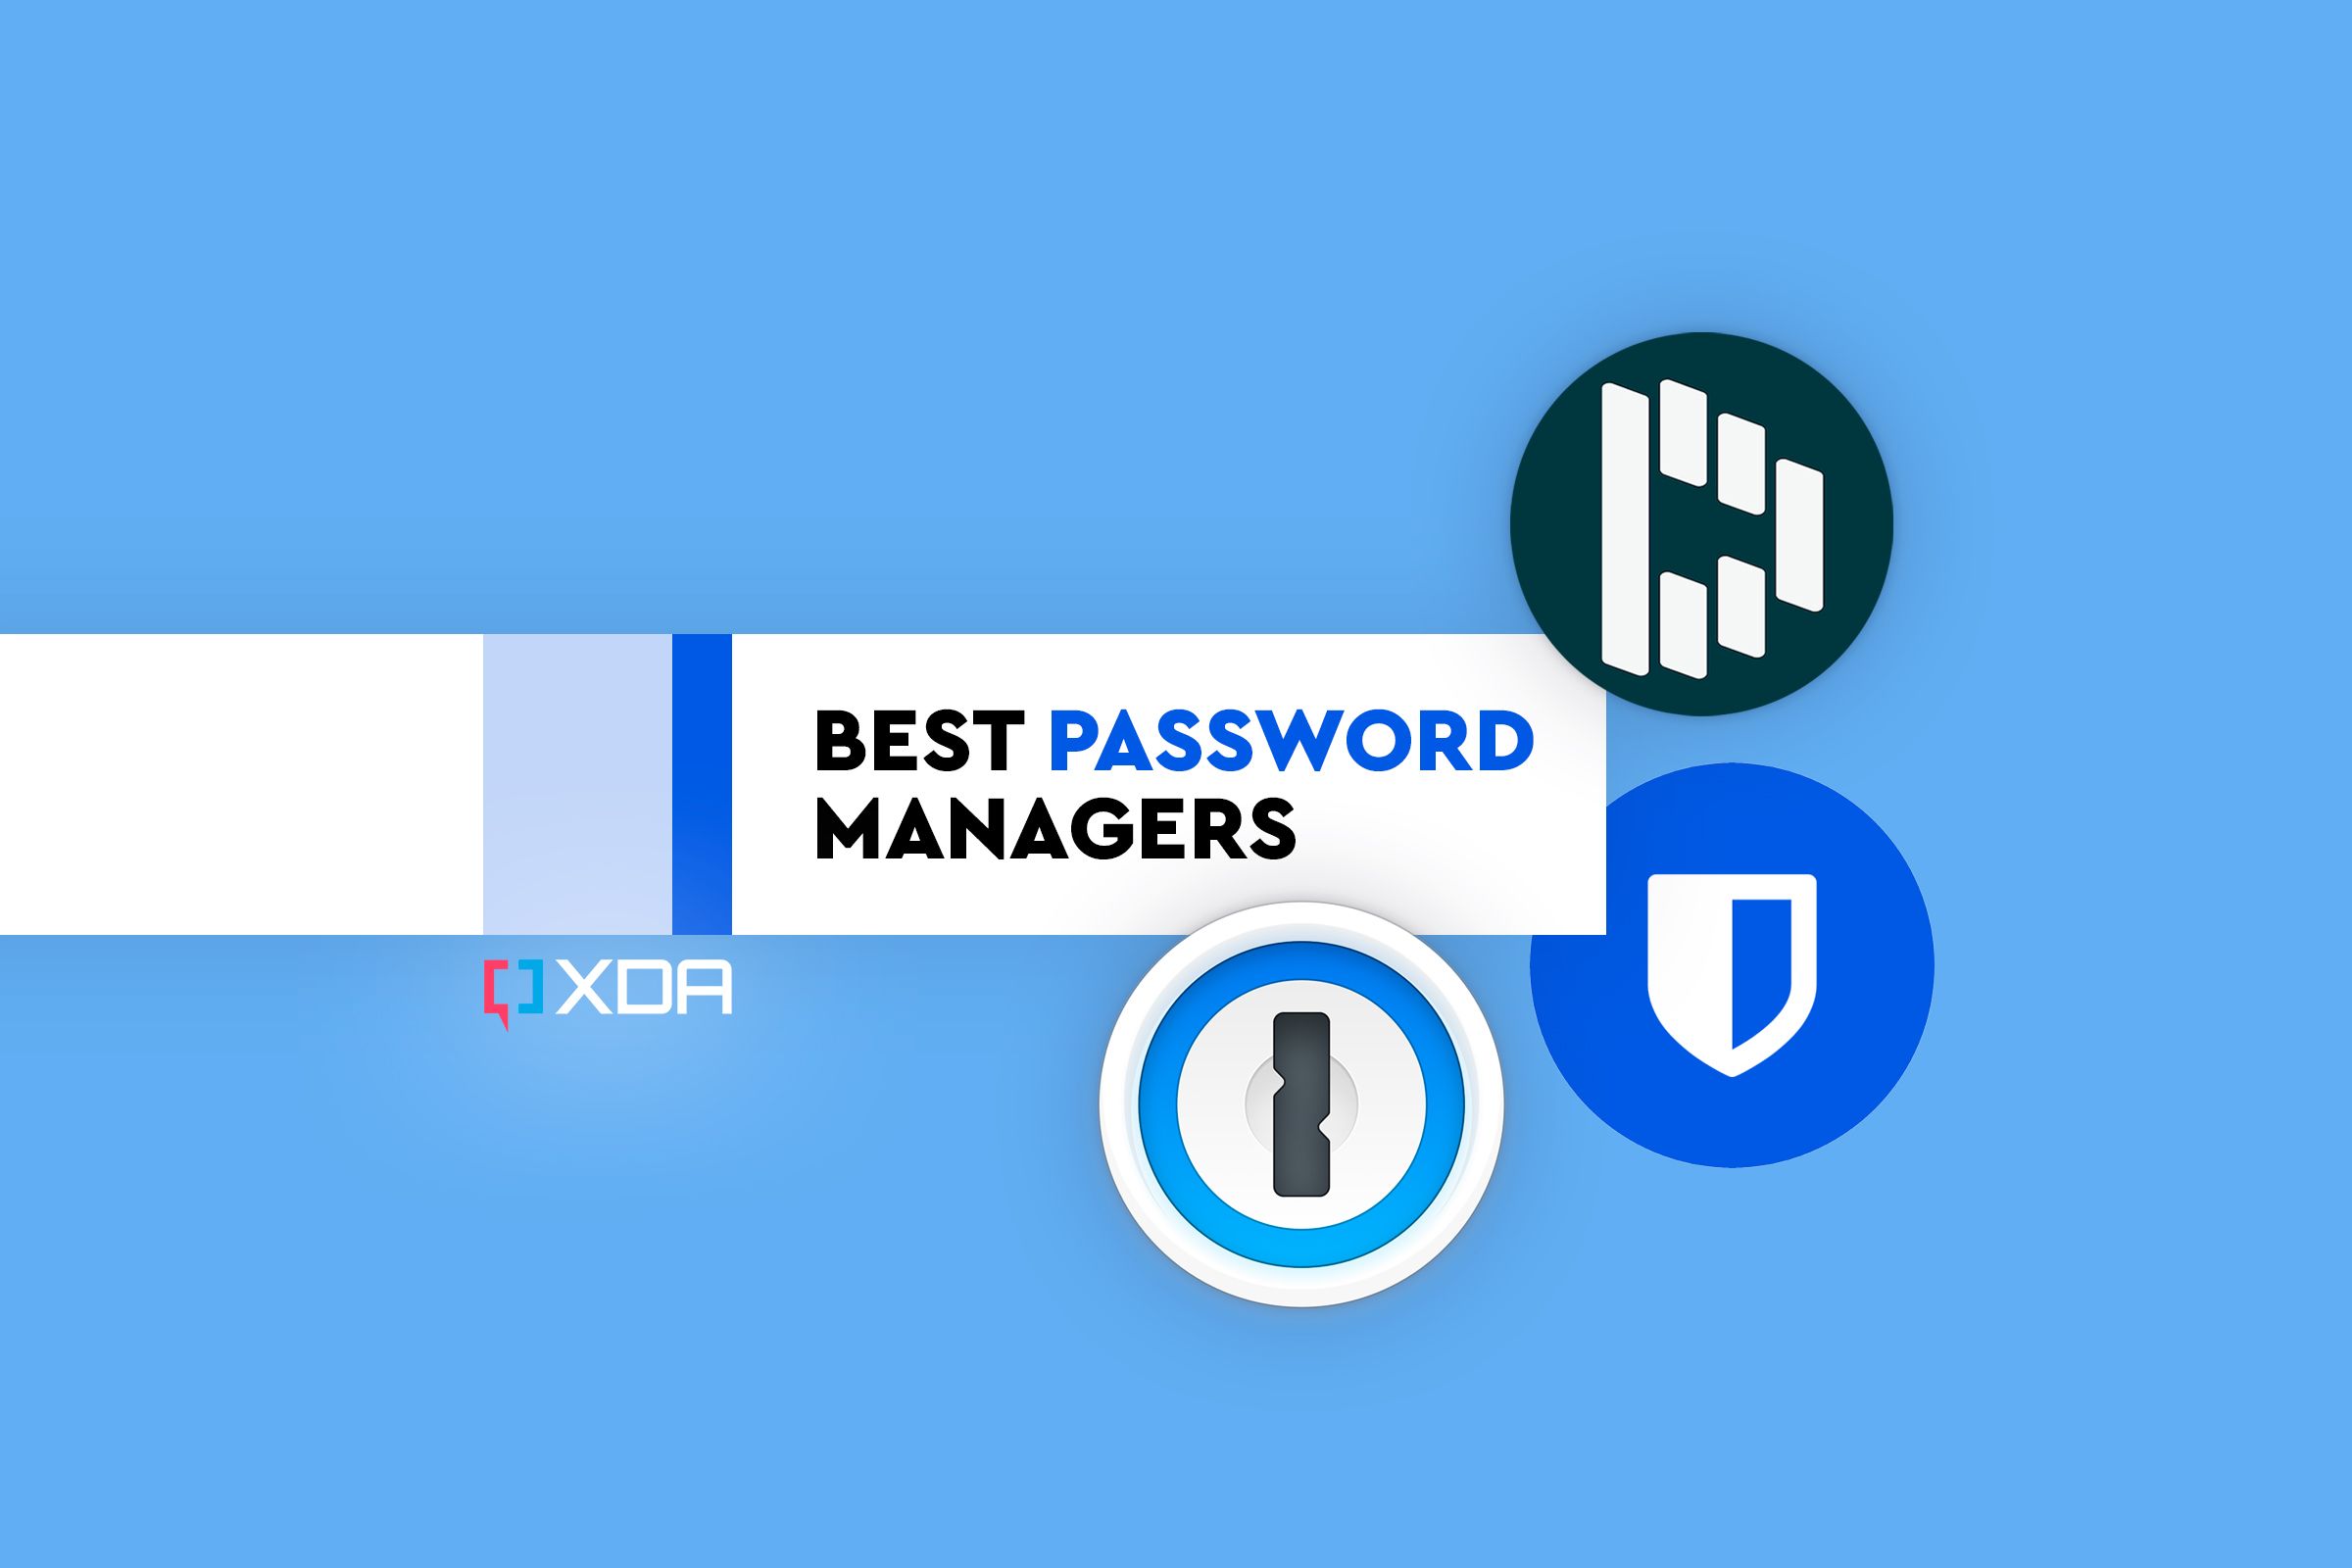 An illustration image showing the logos of popular password managers with the text 